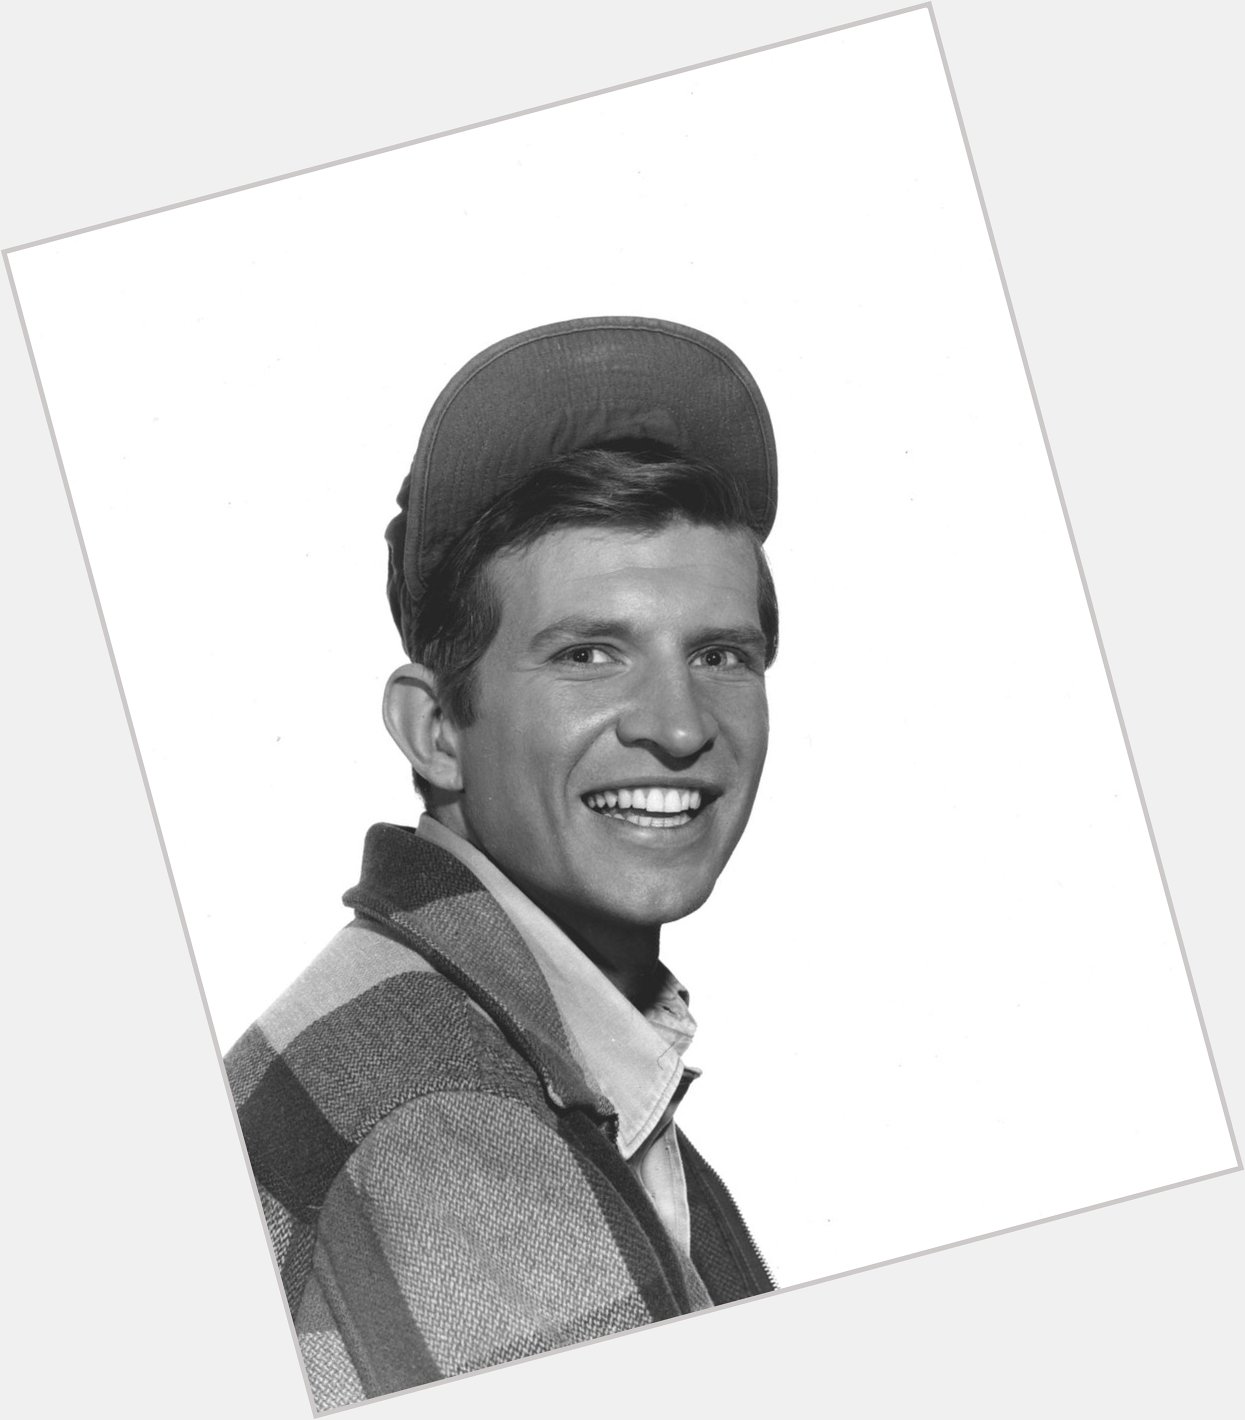 Happy Birthday to Fan of Tom Lester (Eb Dawson of Green Acres), born Sept. 23. He turned 80. 